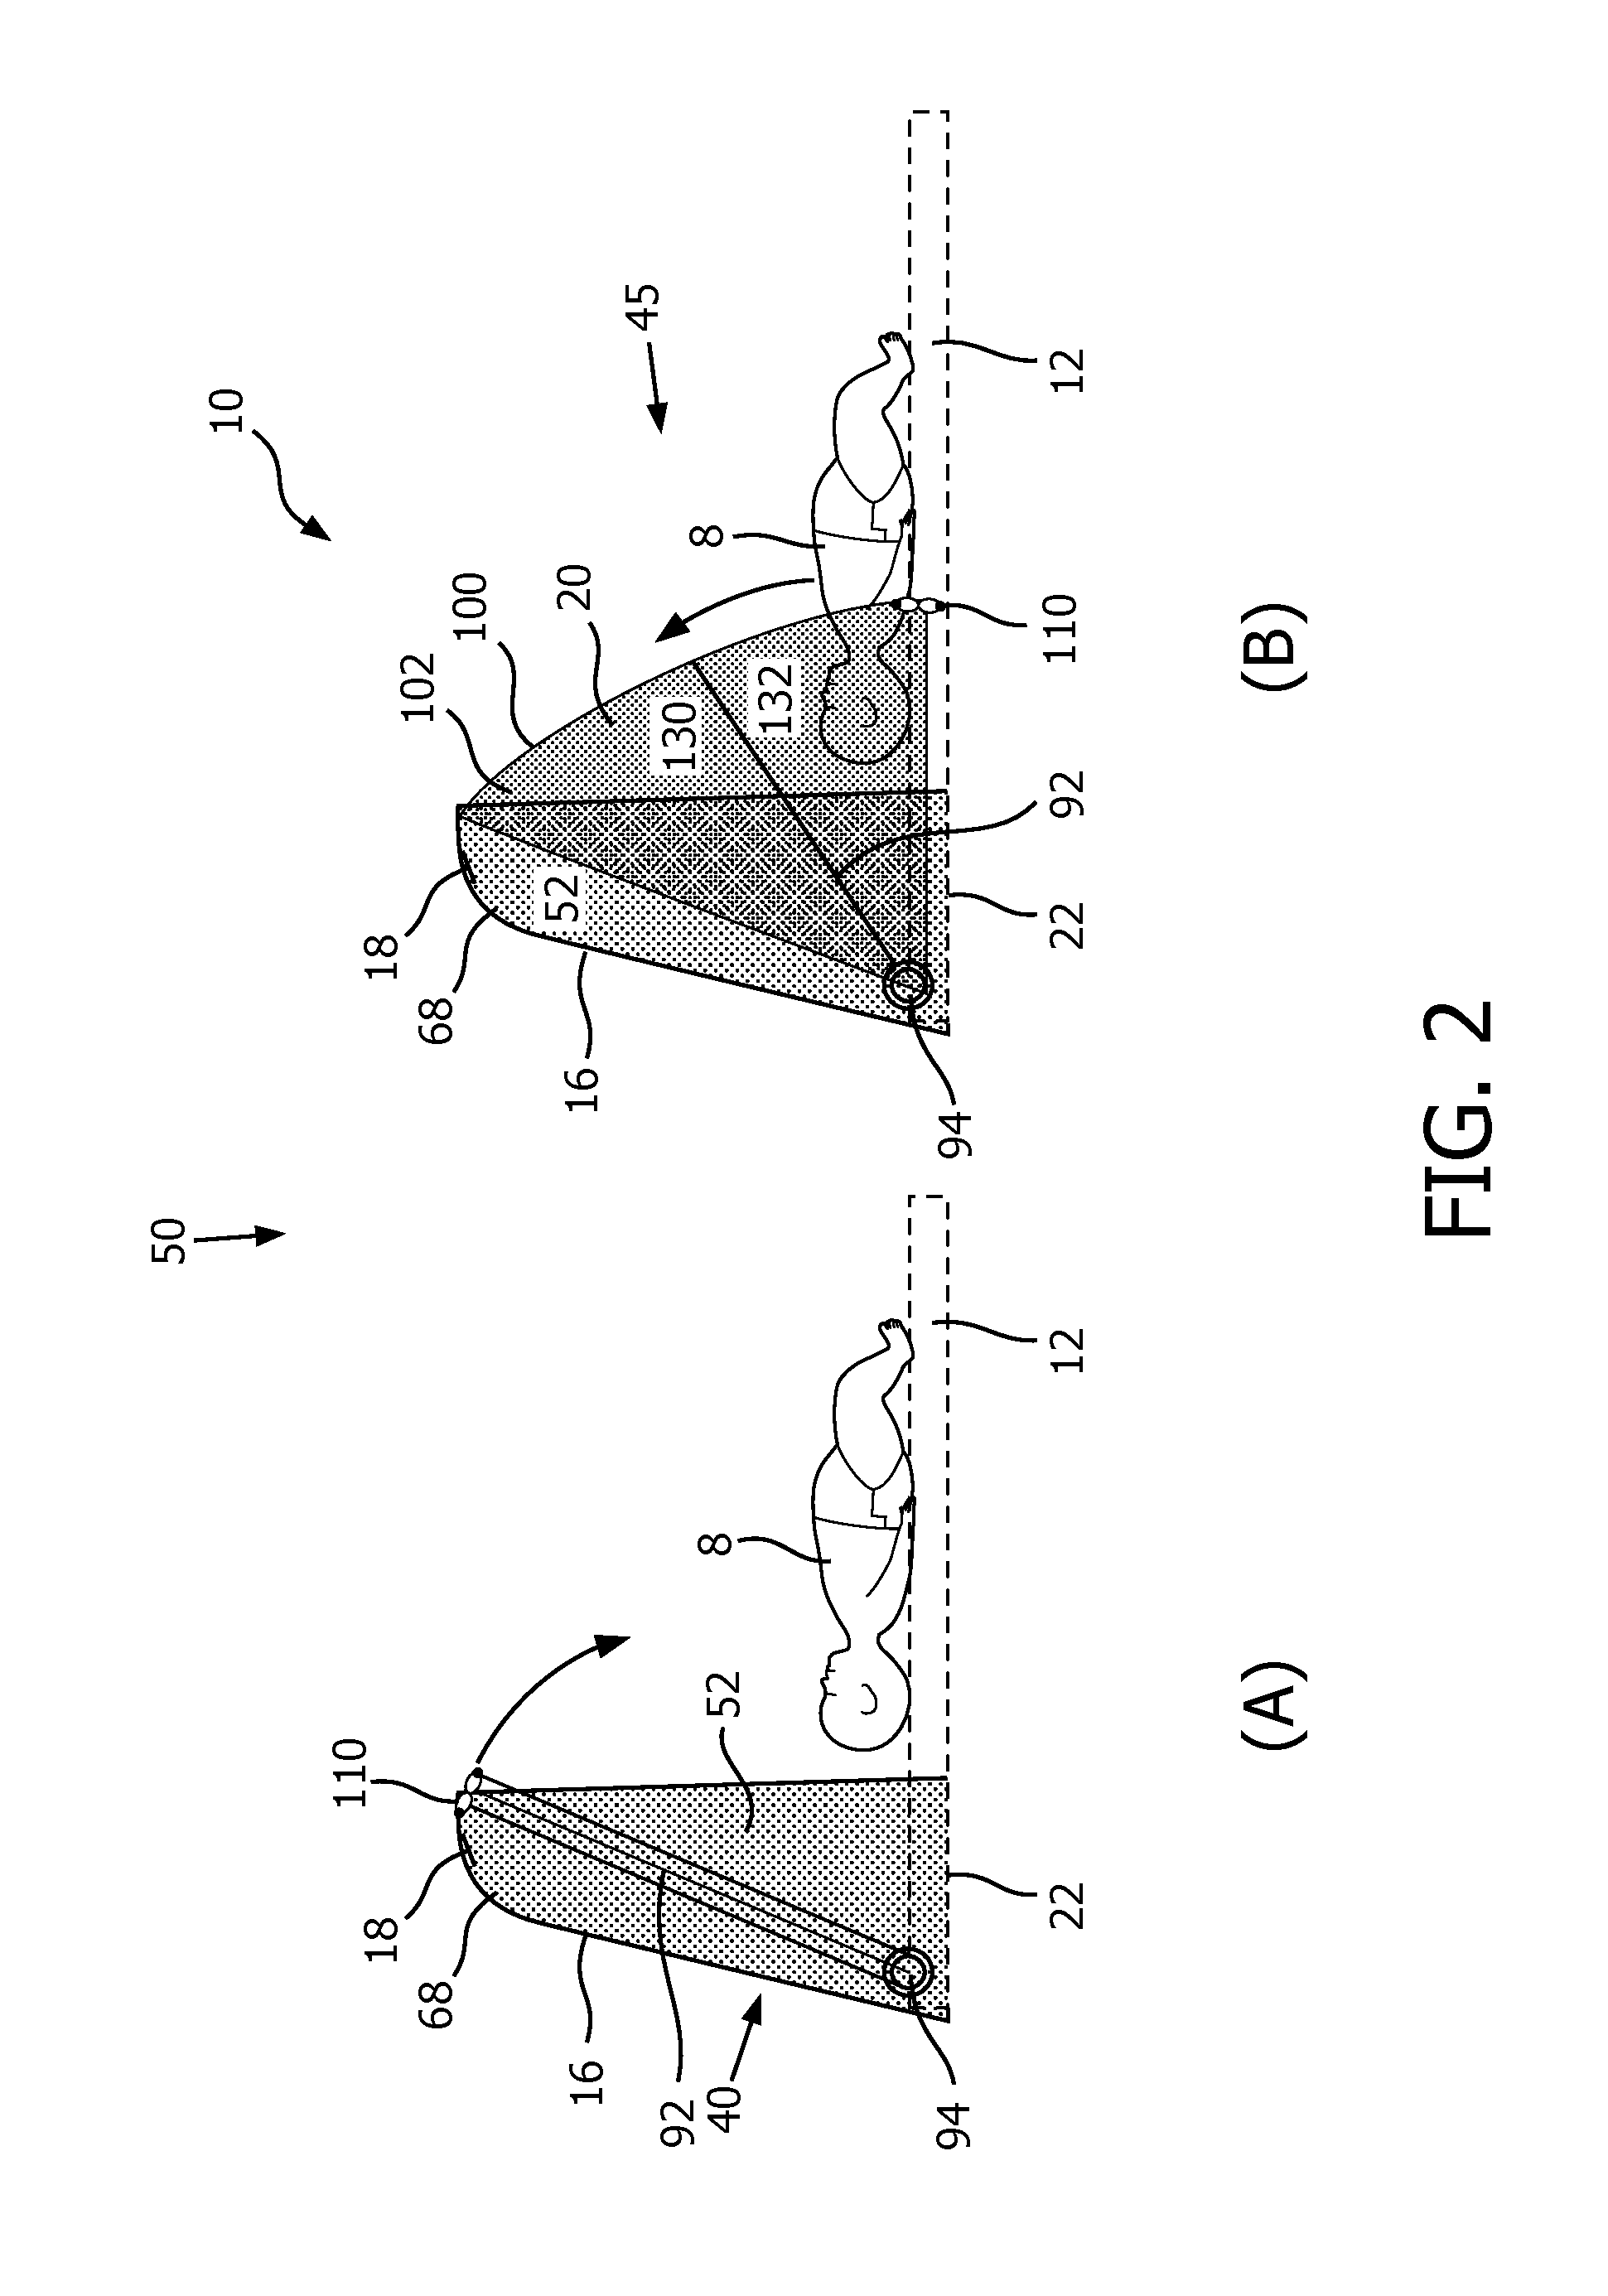 Infant bed attachment system